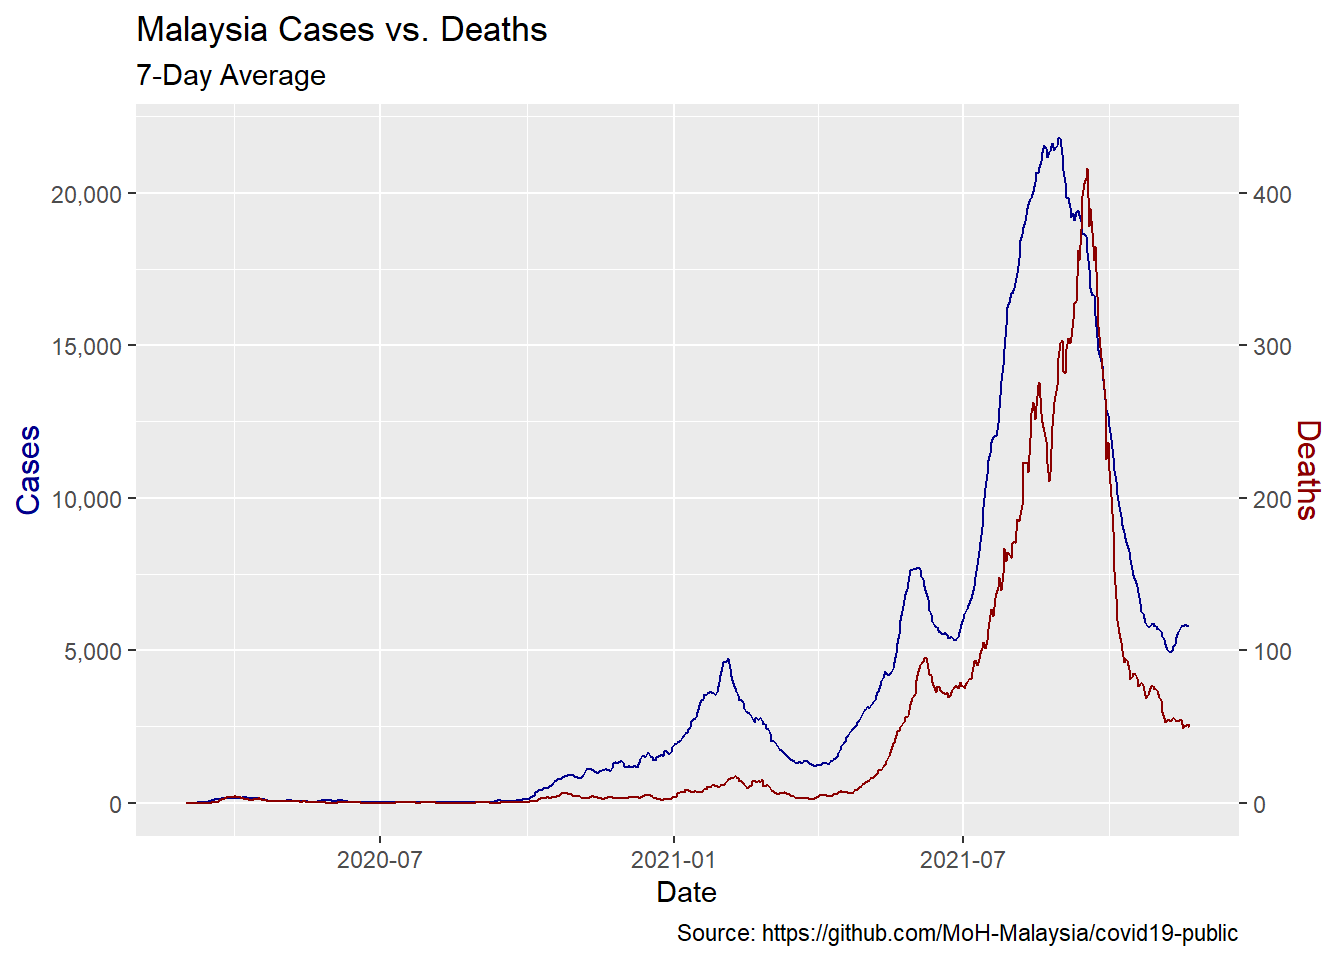 Rolling average of weekly cases and deaths